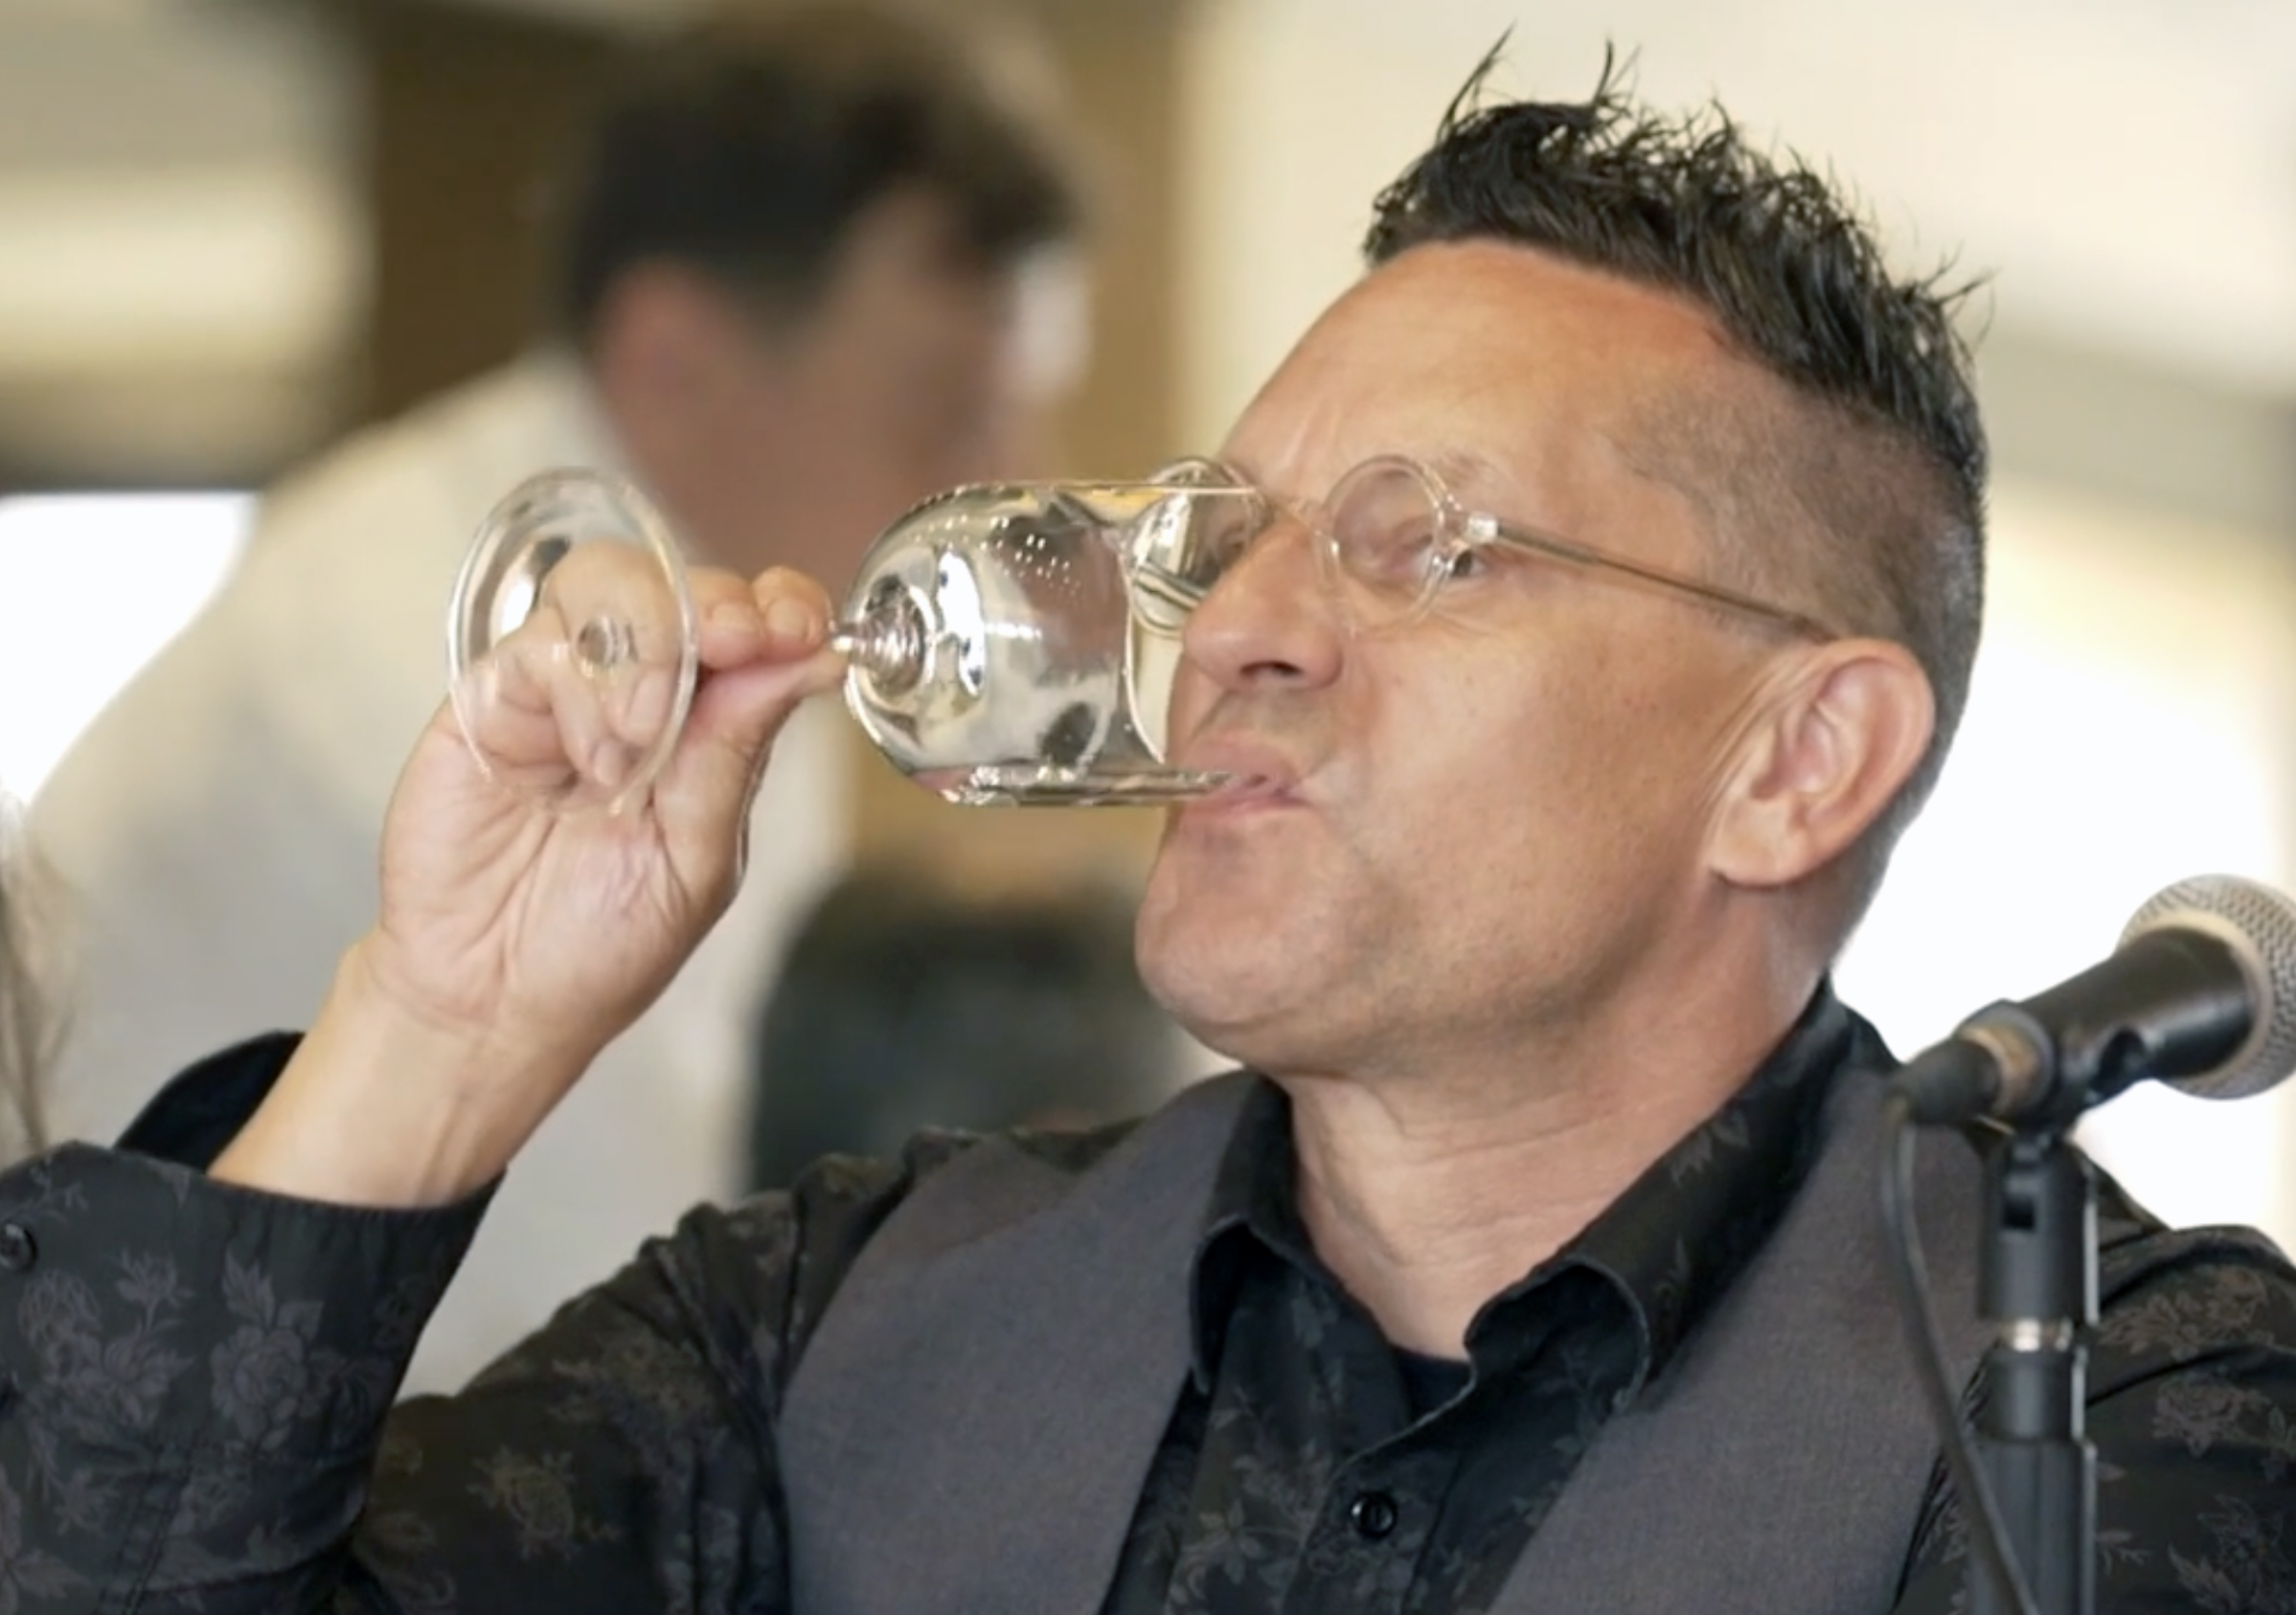 PHOTO: Martin Riese, a certified water sommelier, is shown tasting water at the Fine Water Summit in Athens, Greece.